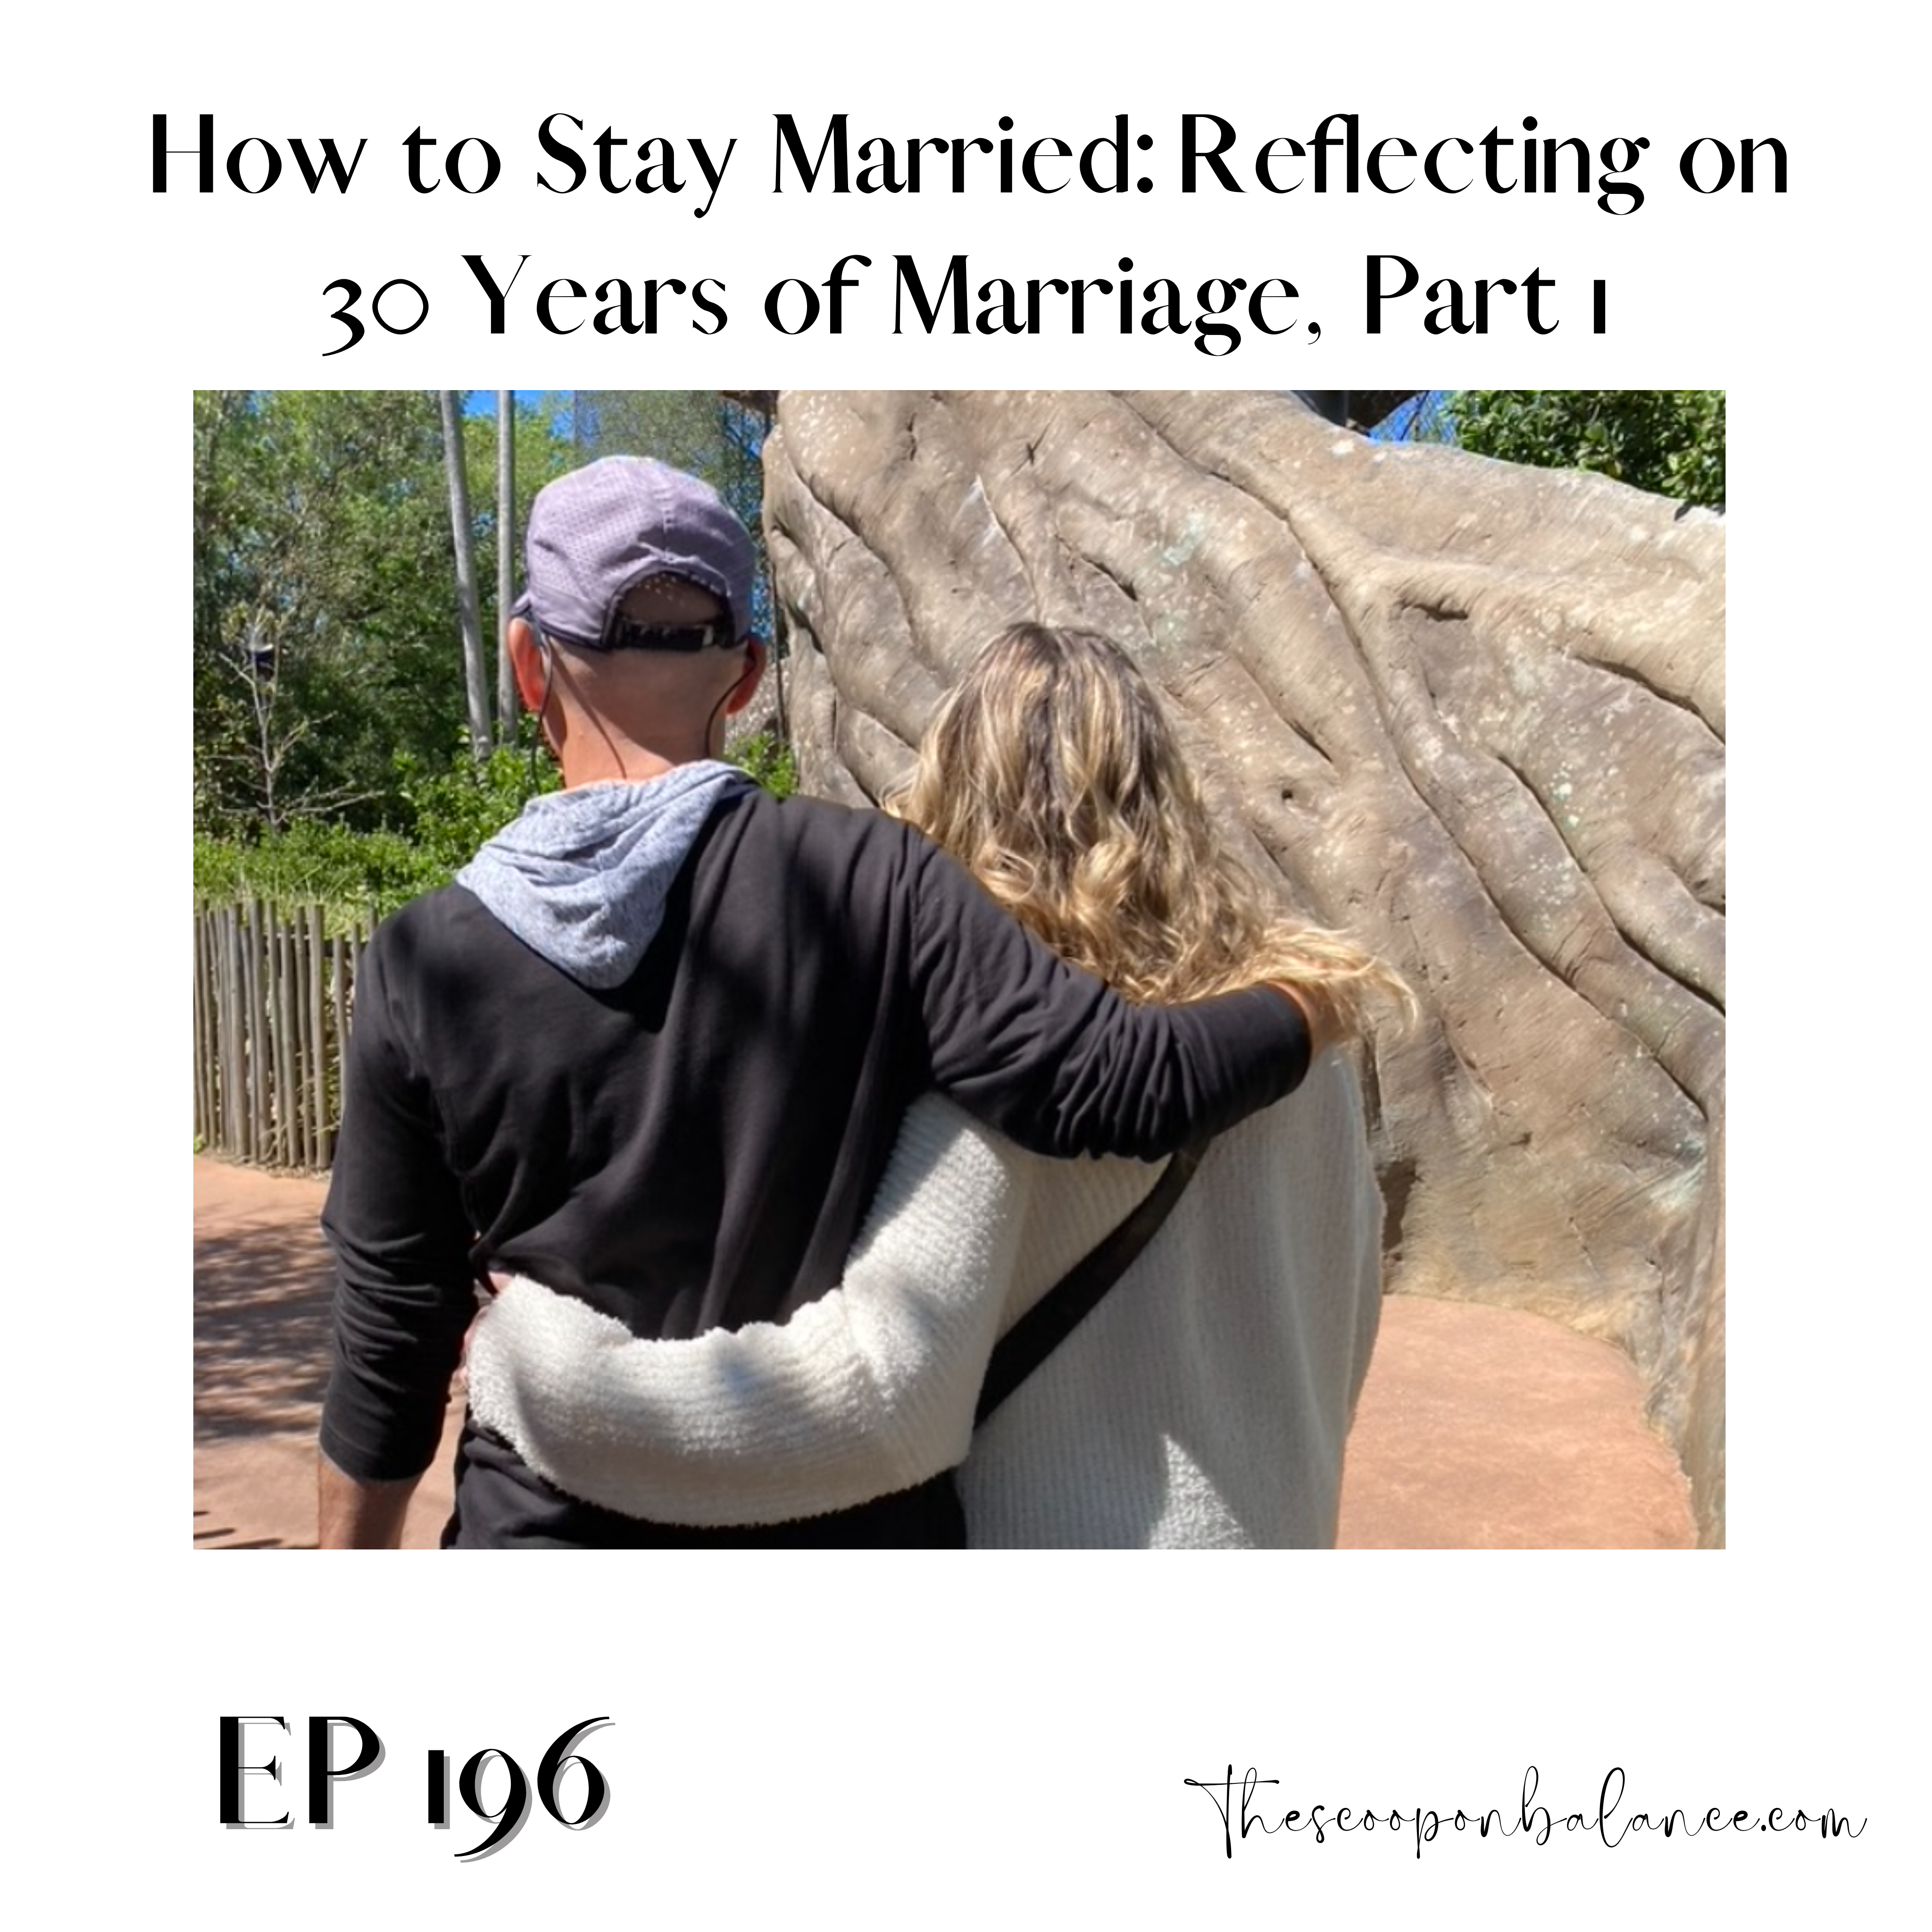 Ep 196: How to Stay Married: Reflecting on 30 Years of Marriage, Part 1